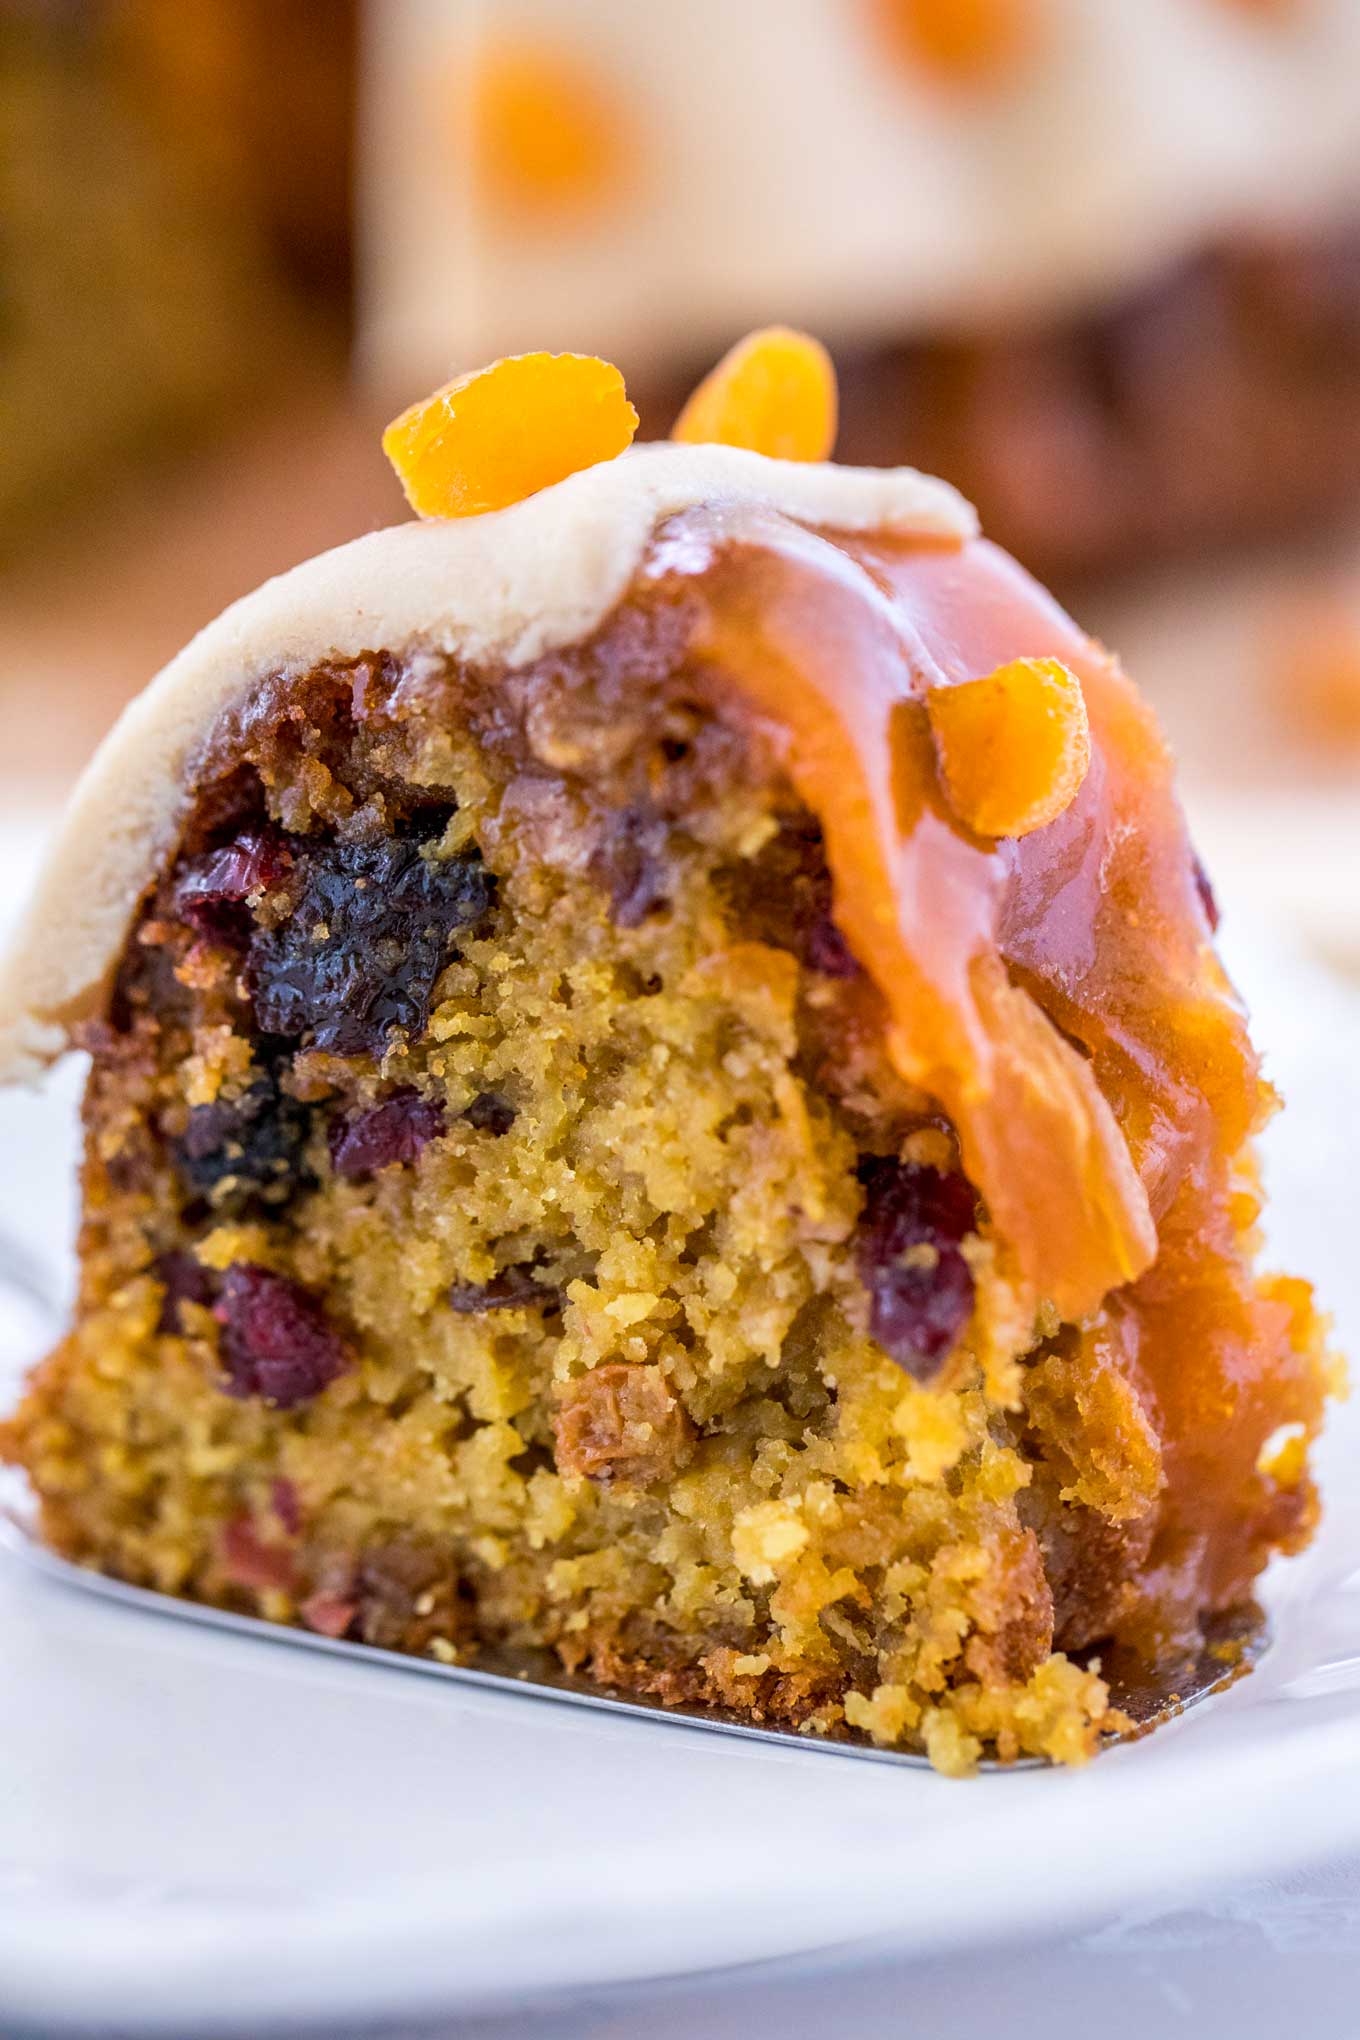 Gluten Free Simnel Cake a Rich Fruit Cake for Easter